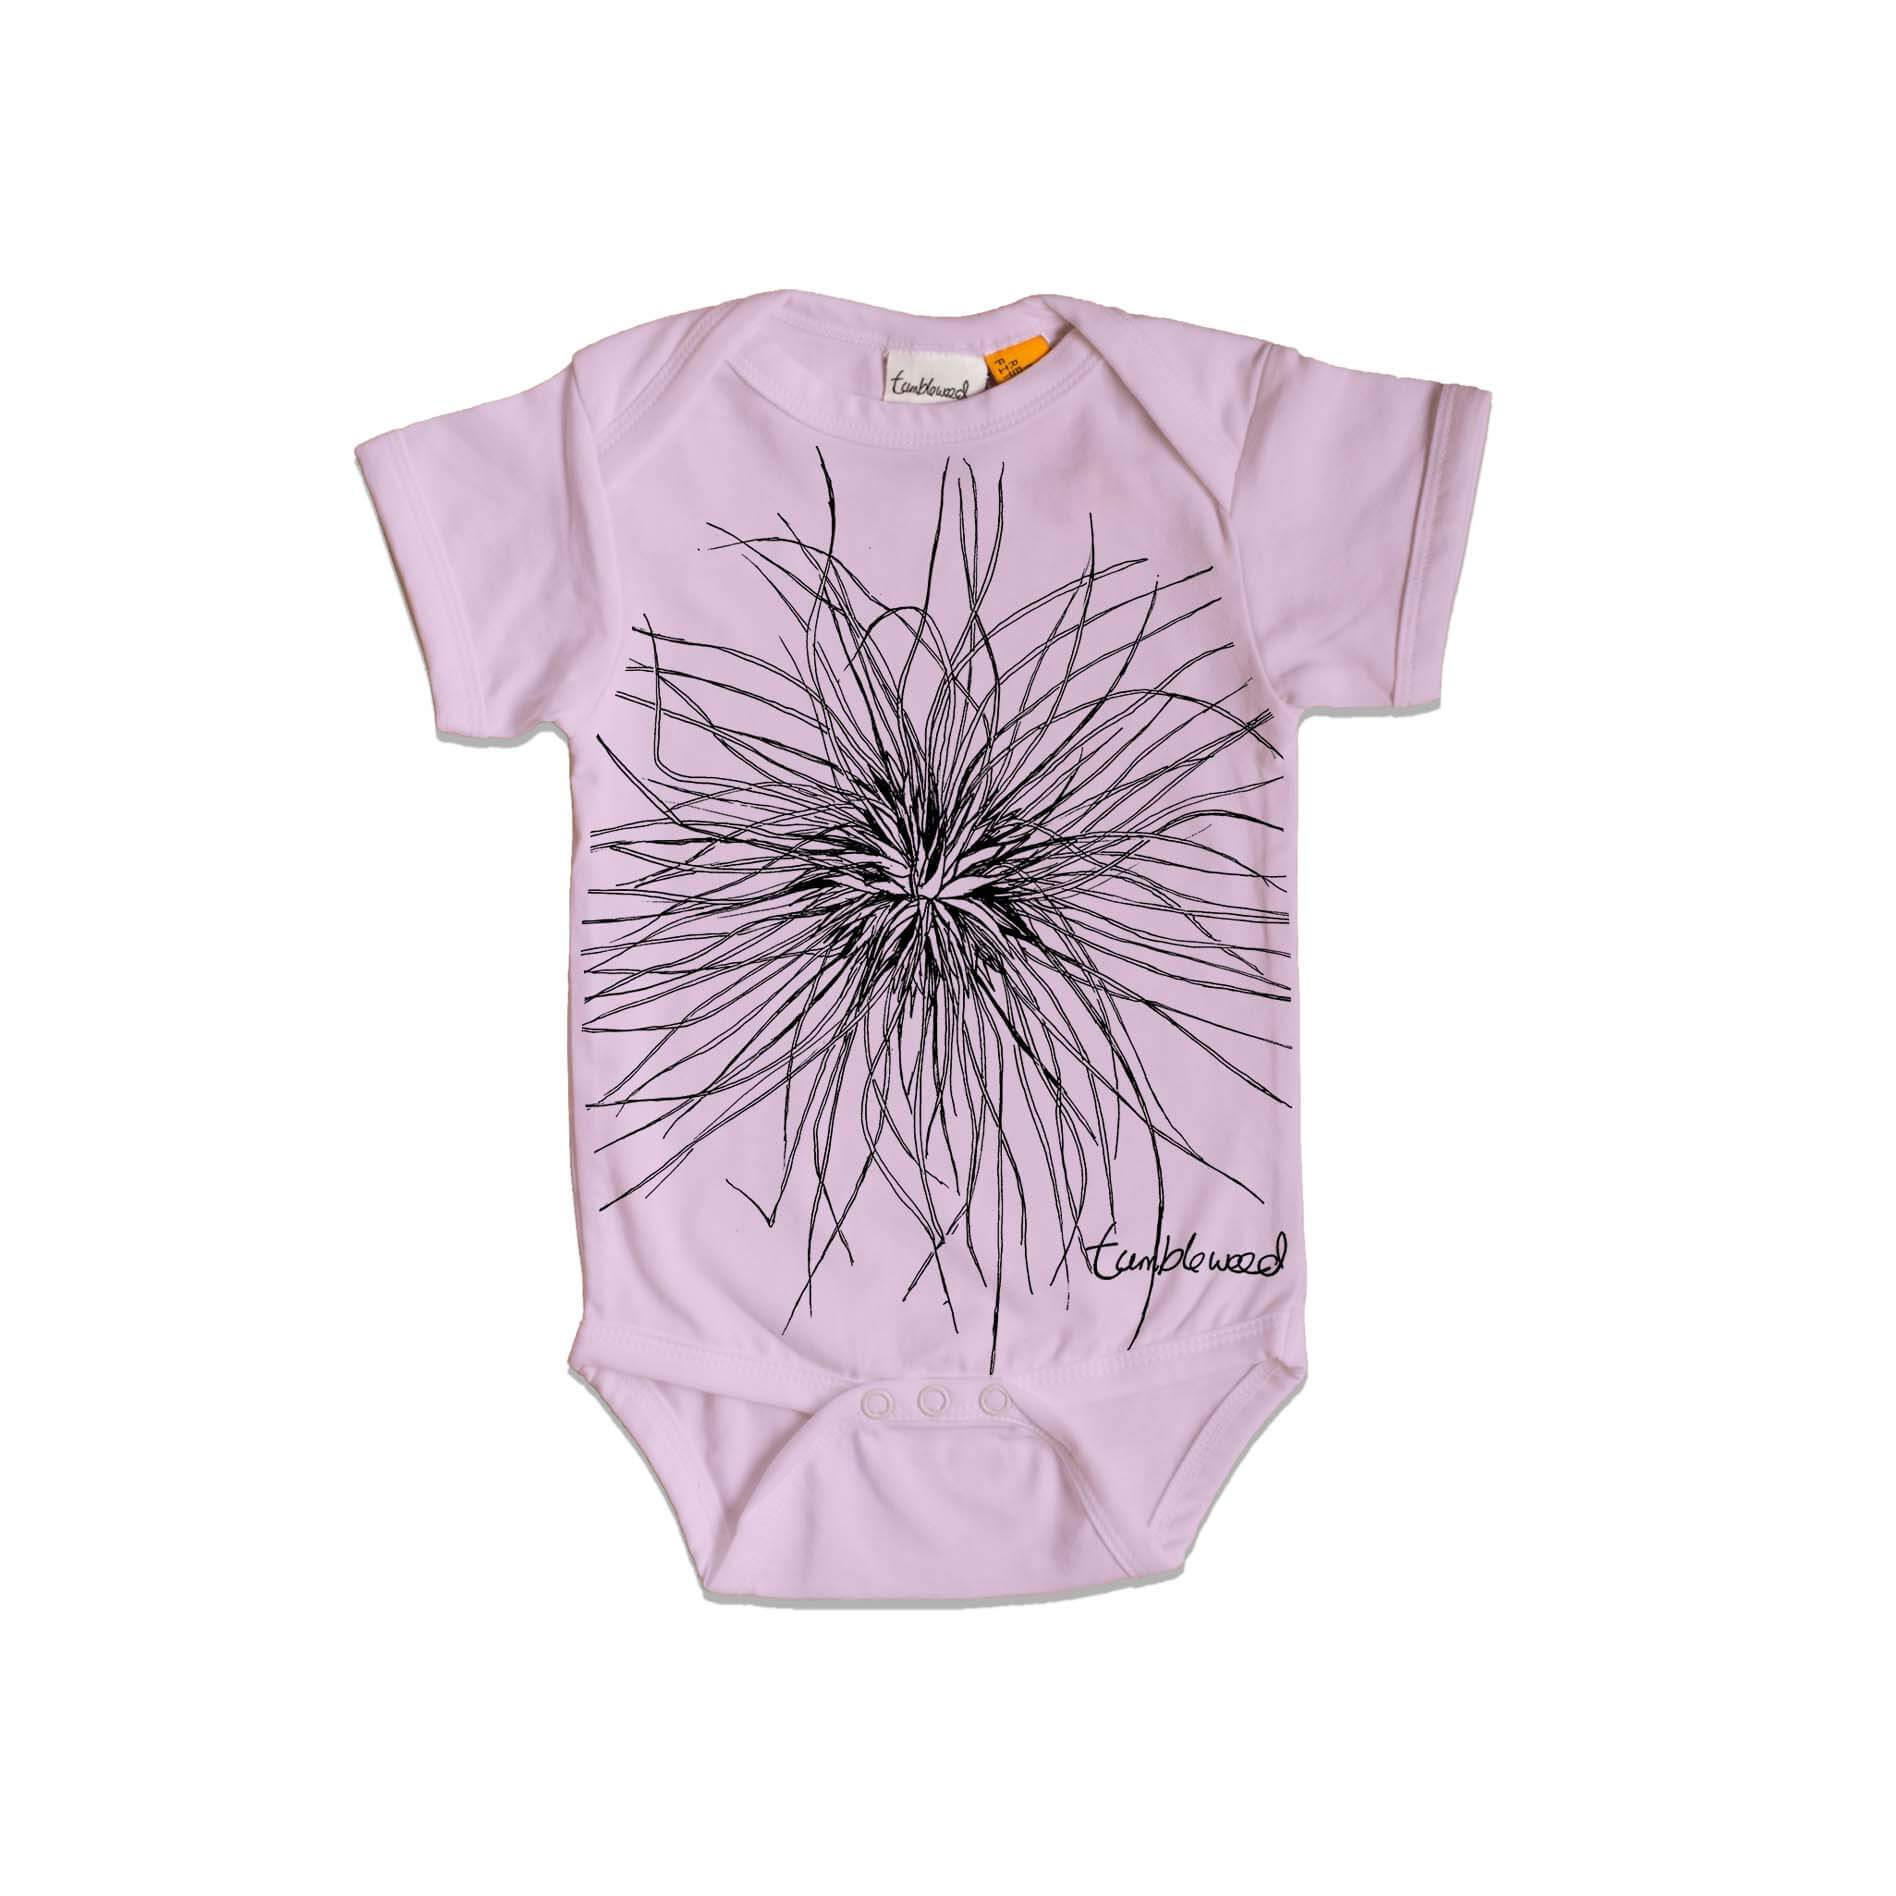 Short sleeved, purple, organic cotton, baby onesie featuring a screen printed Tumbleweed/Spinifex design.
 design.